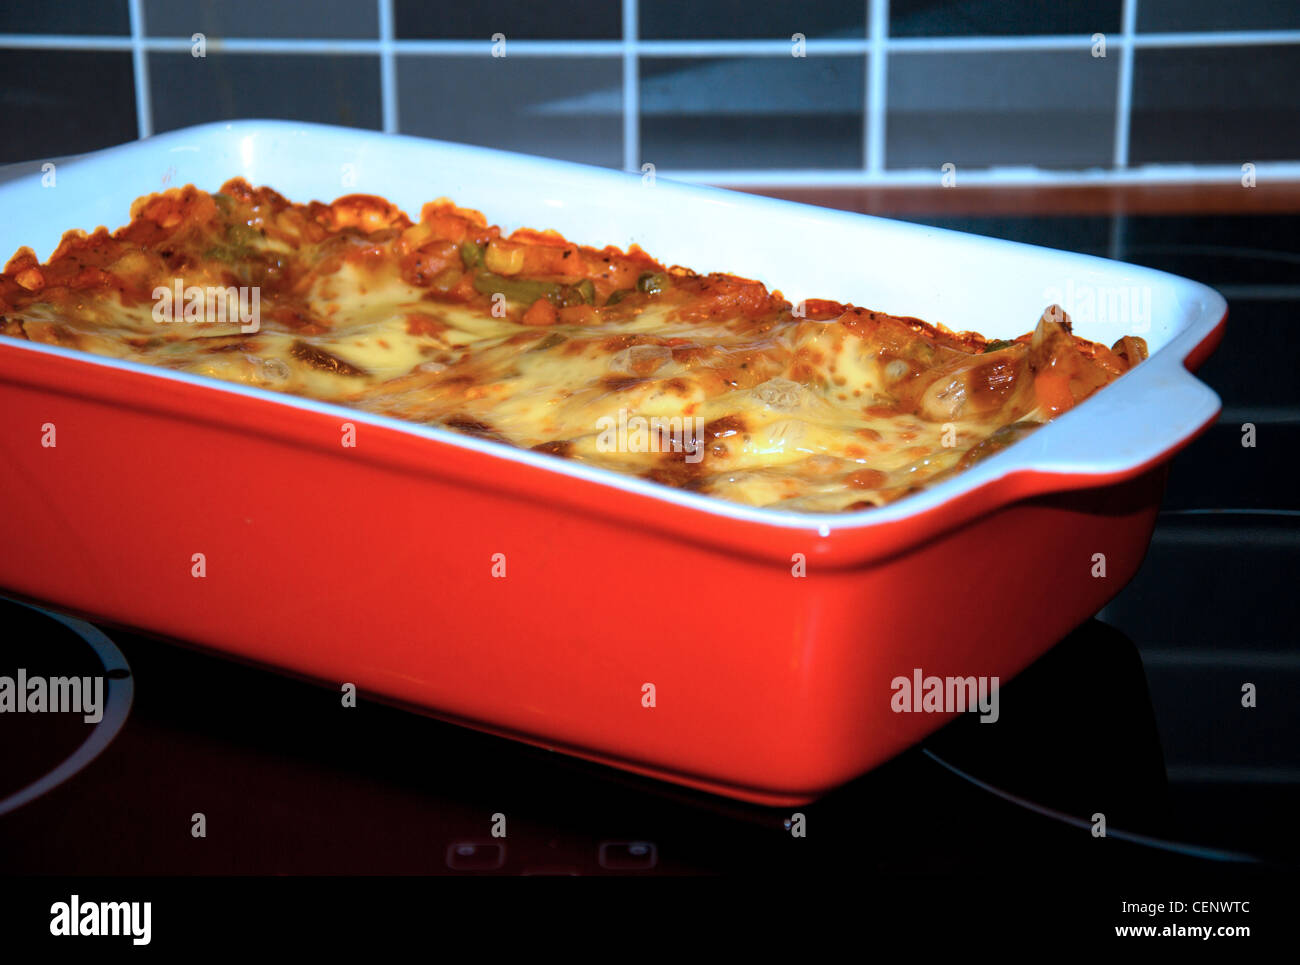 Bake lasagne in the red saucer. Stock Photo